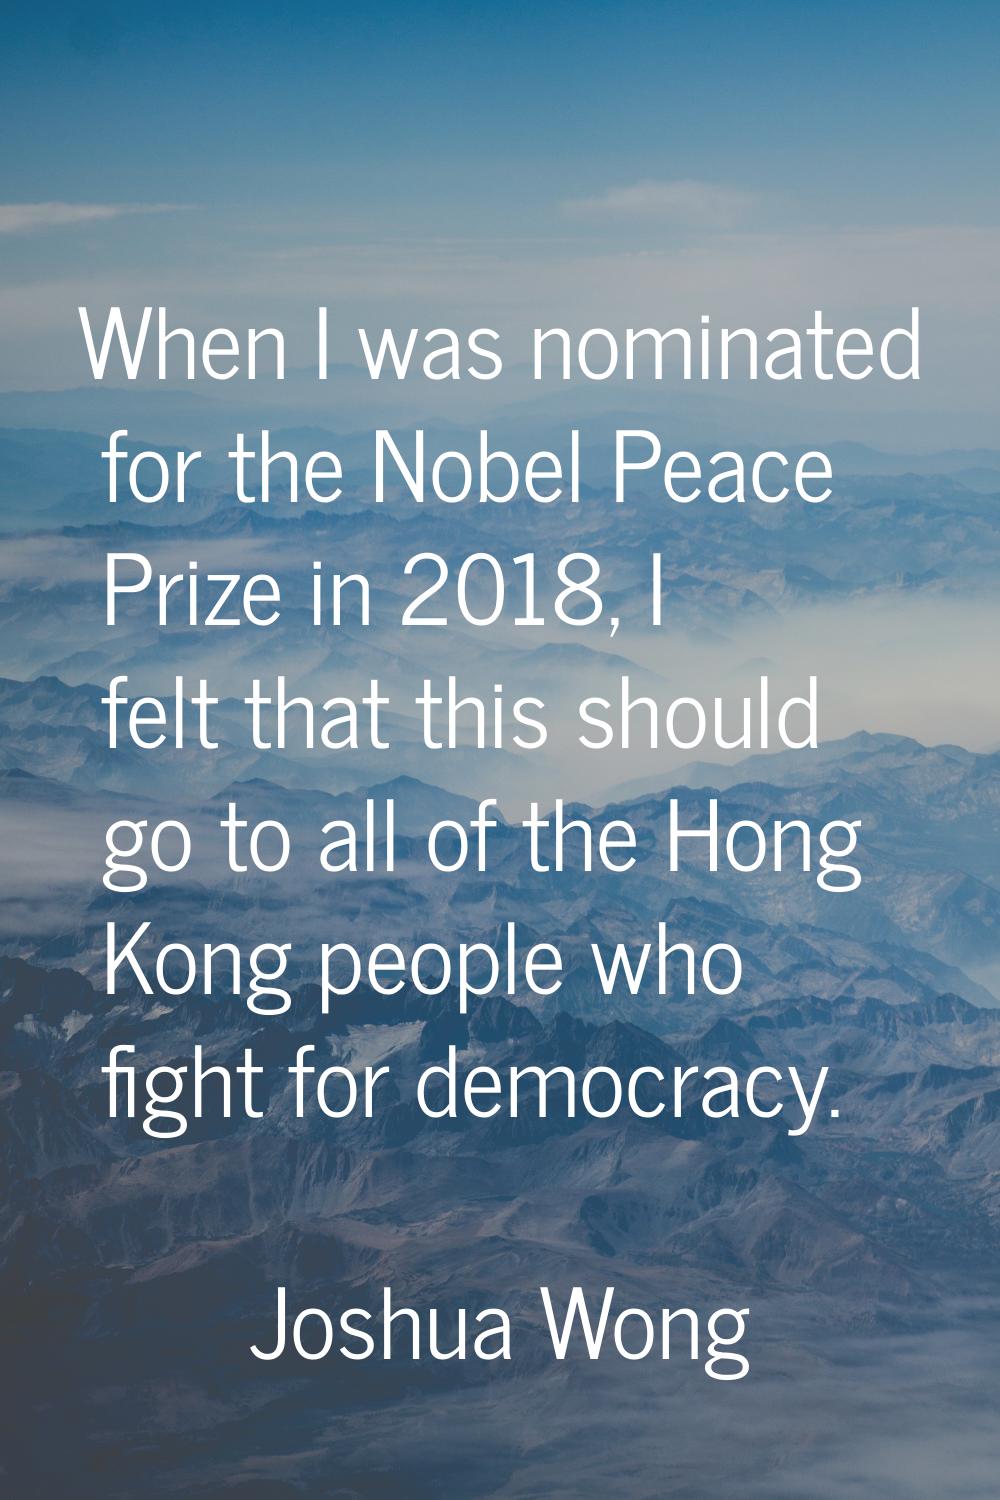 When I was nominated for the Nobel Peace Prize in 2018, I felt that this should go to all of the Ho